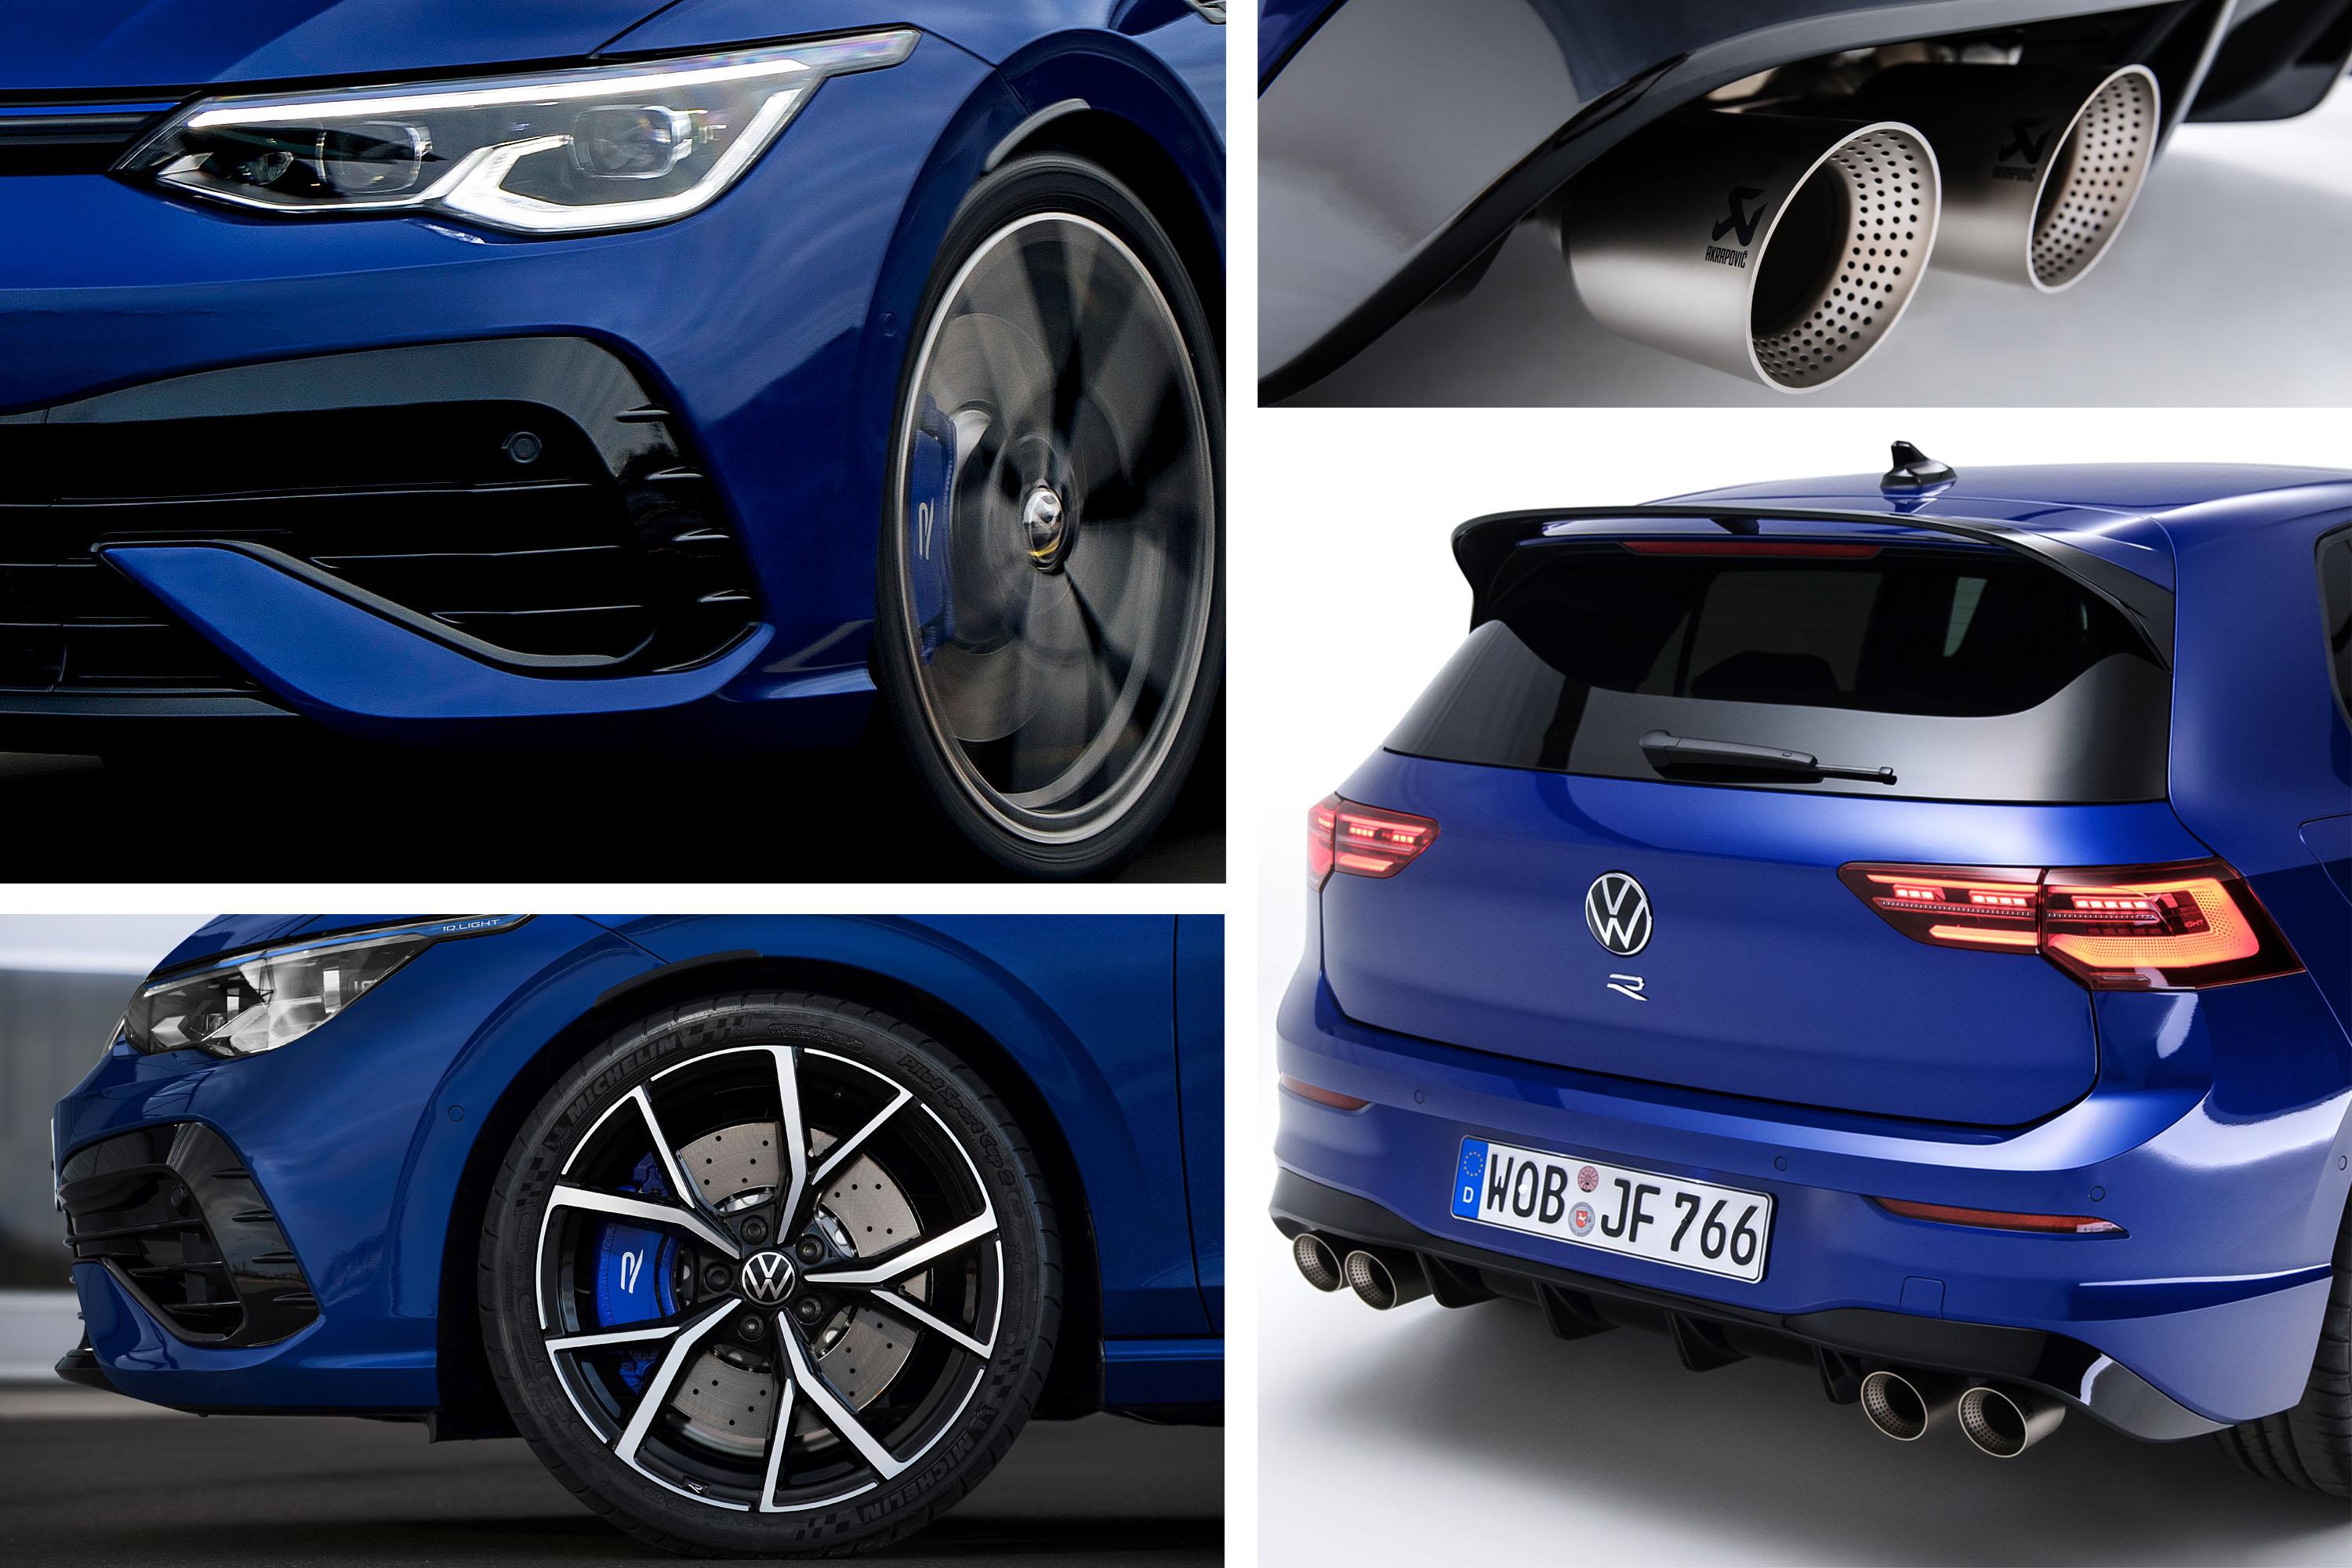 VW uncovers sporty diesel Golf -- for Europe